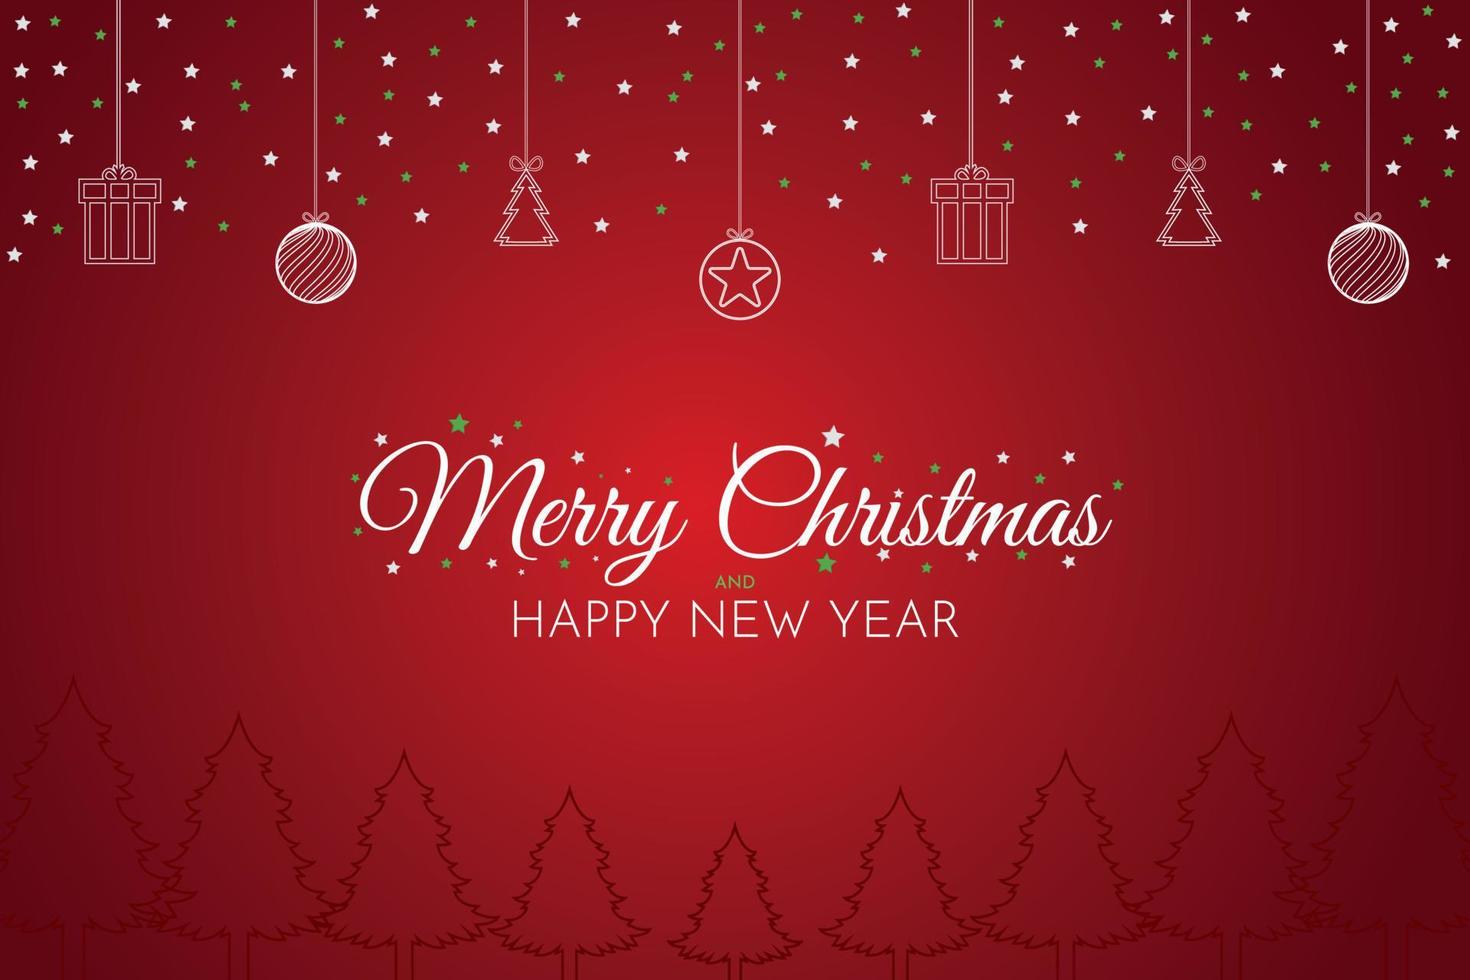 Merry Christmas and Happy New Year Poster Christmas tree with star and elements vector